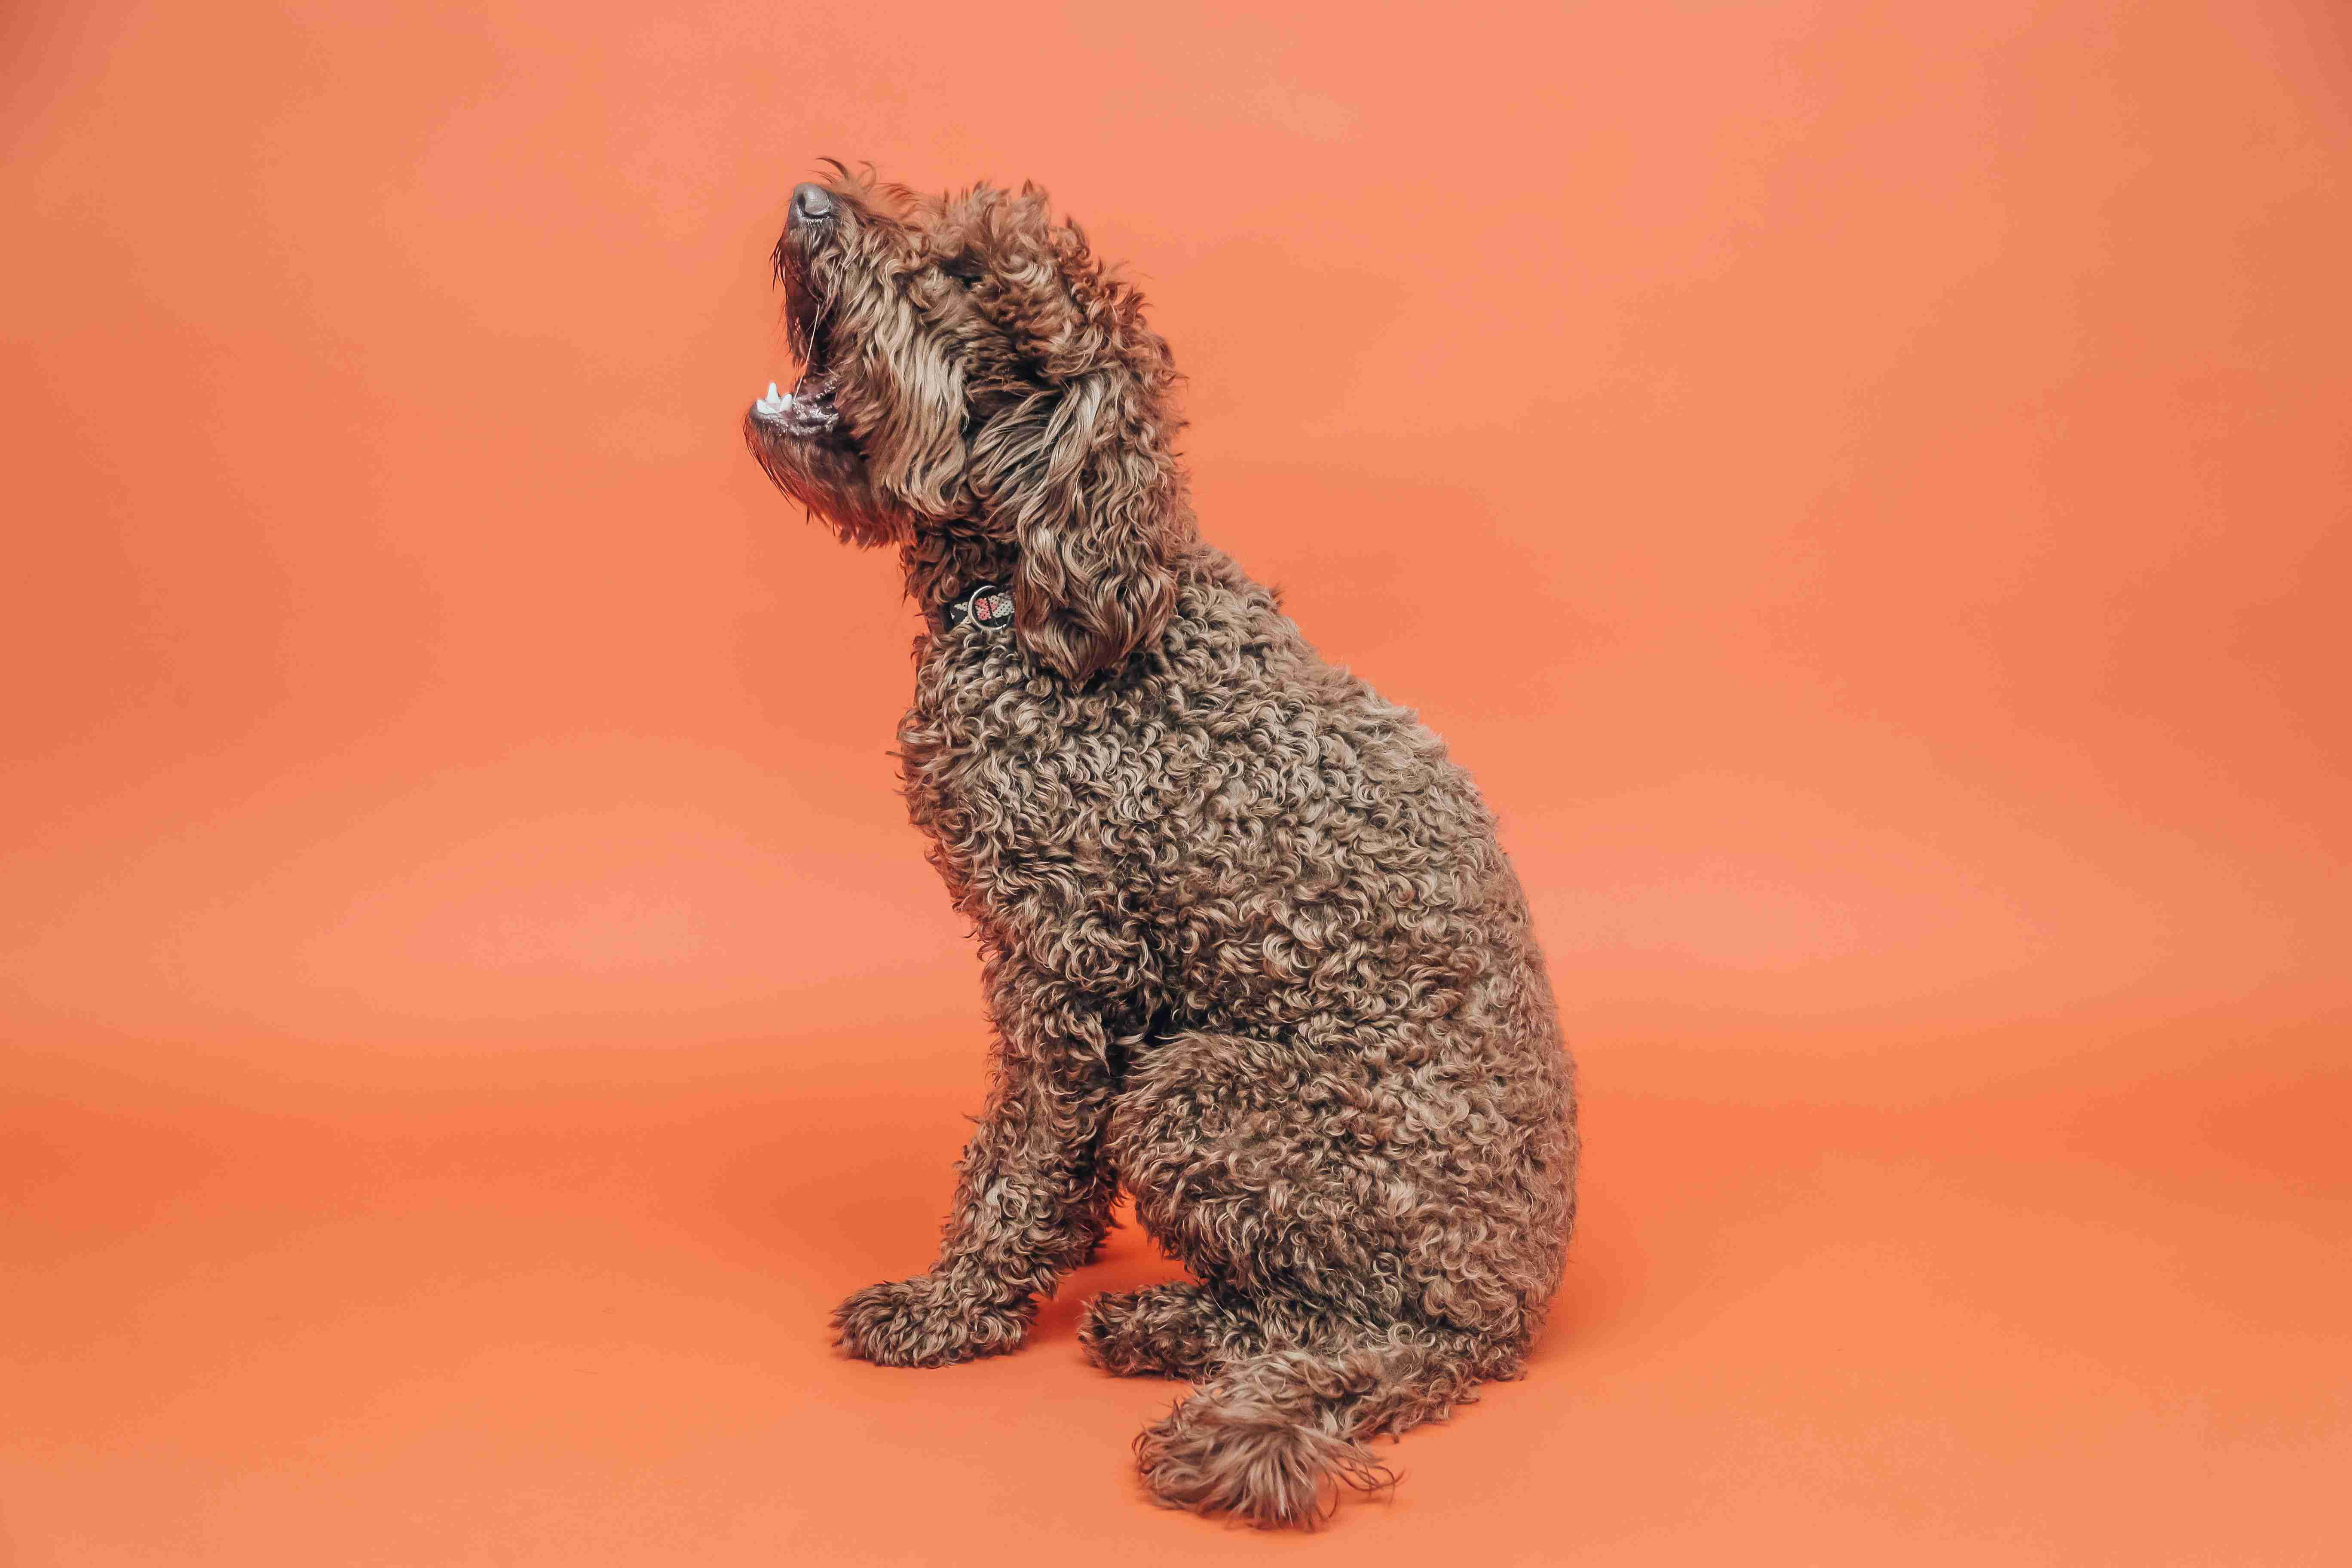 What are the treatment options for Poodles with neurological conditions?